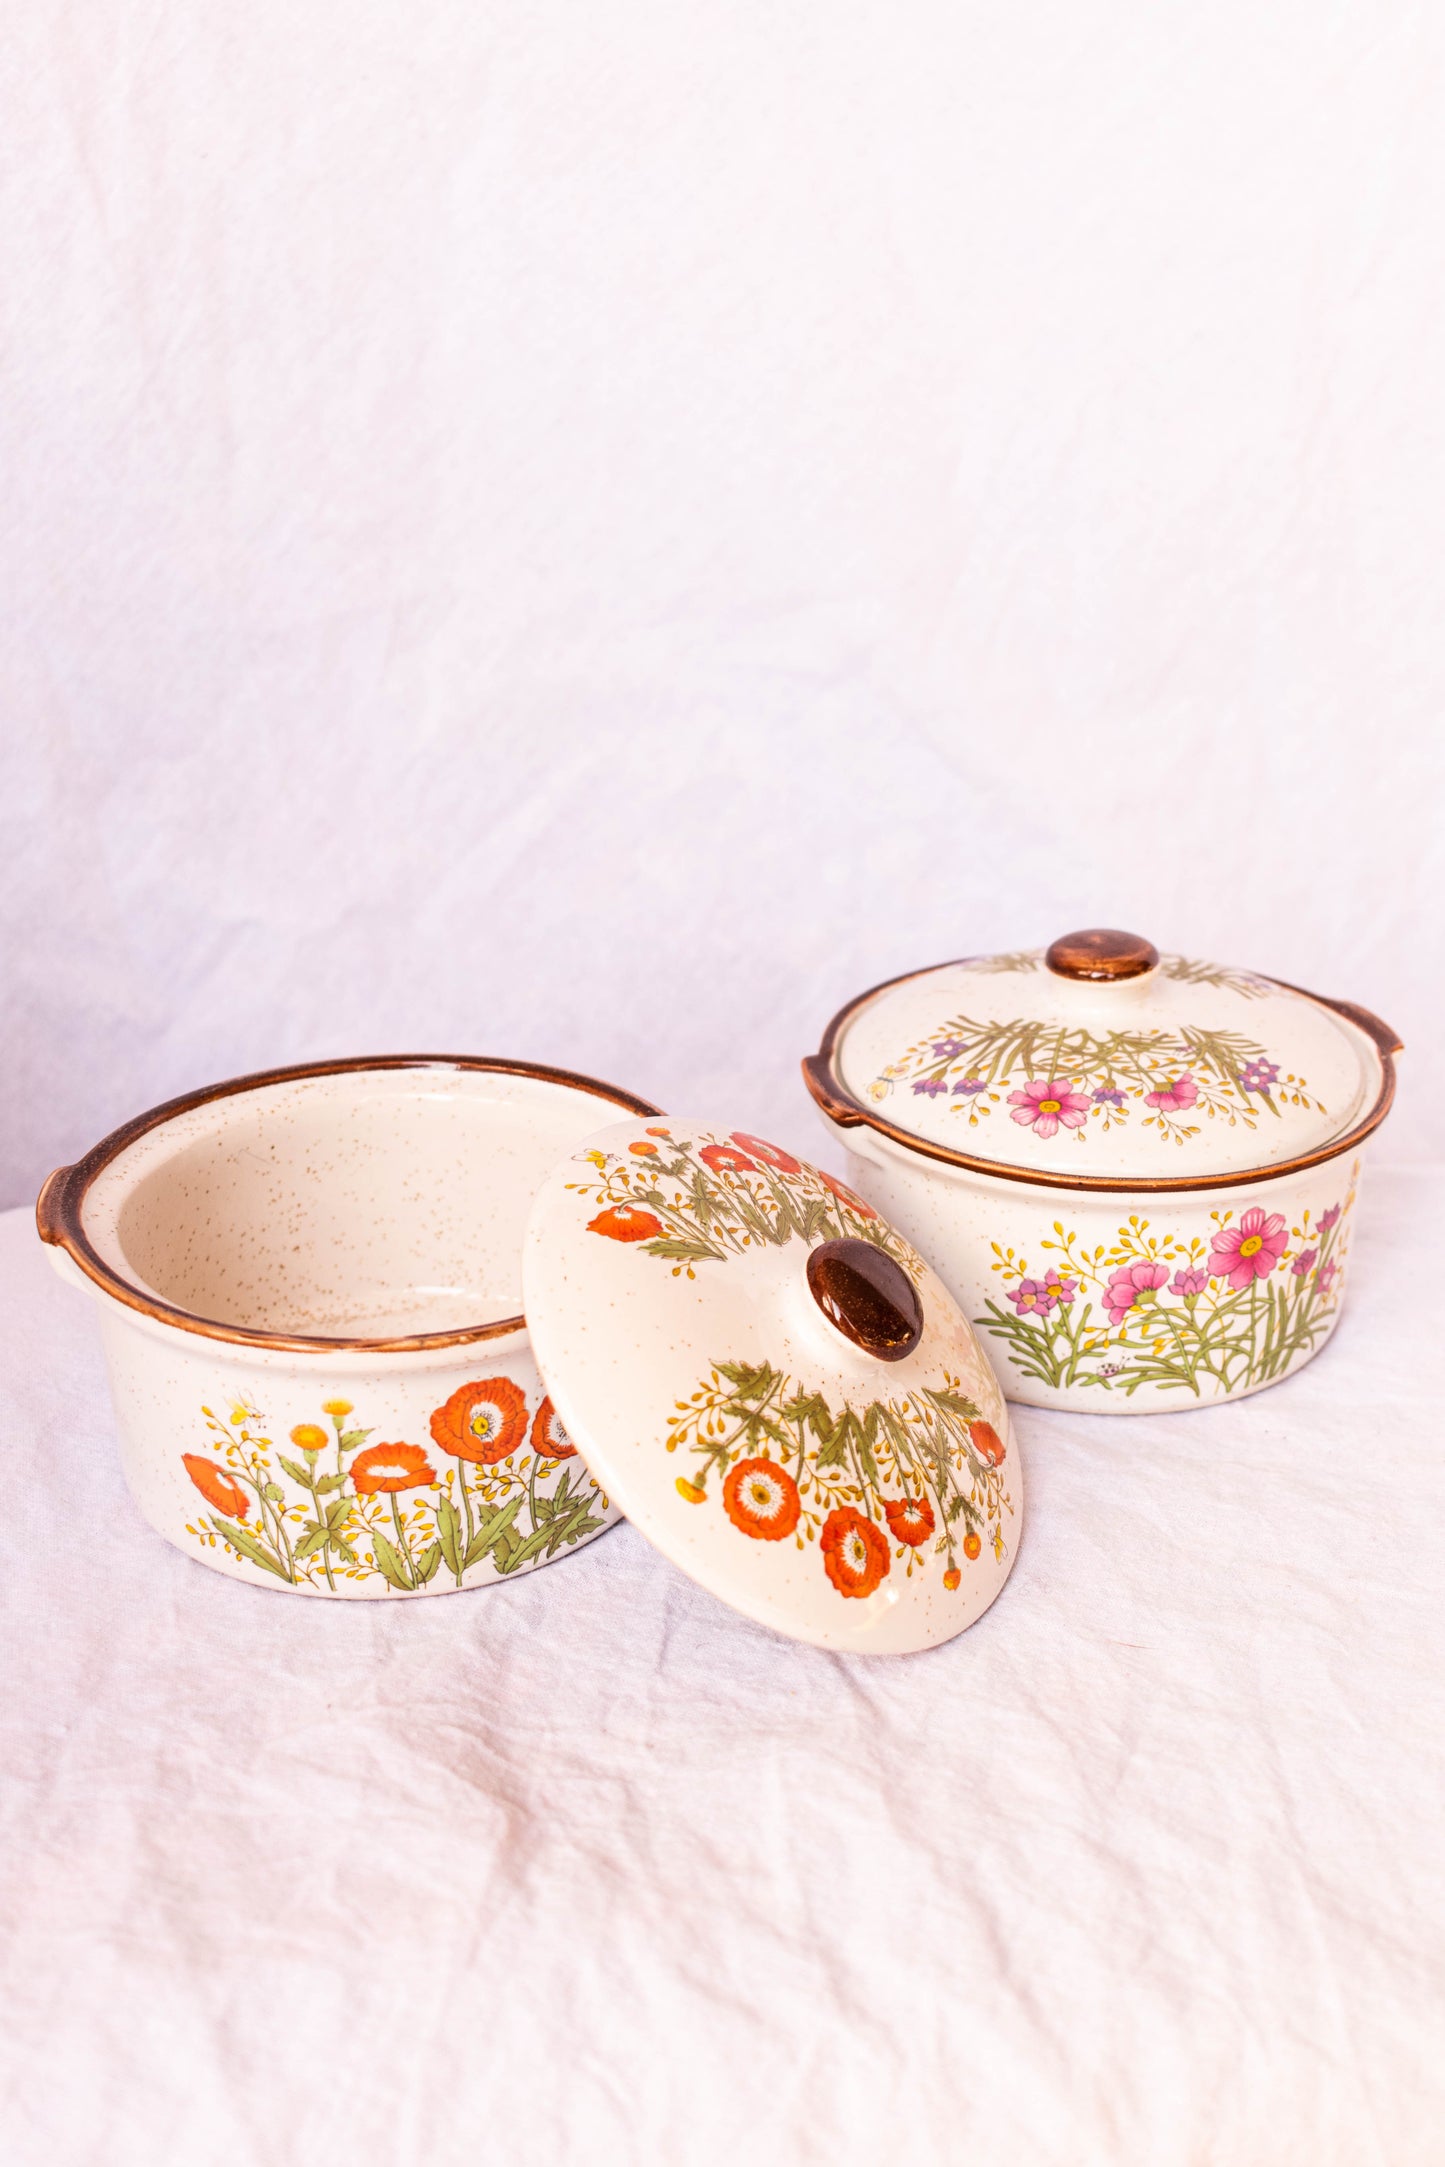 NEW IN! Floral set